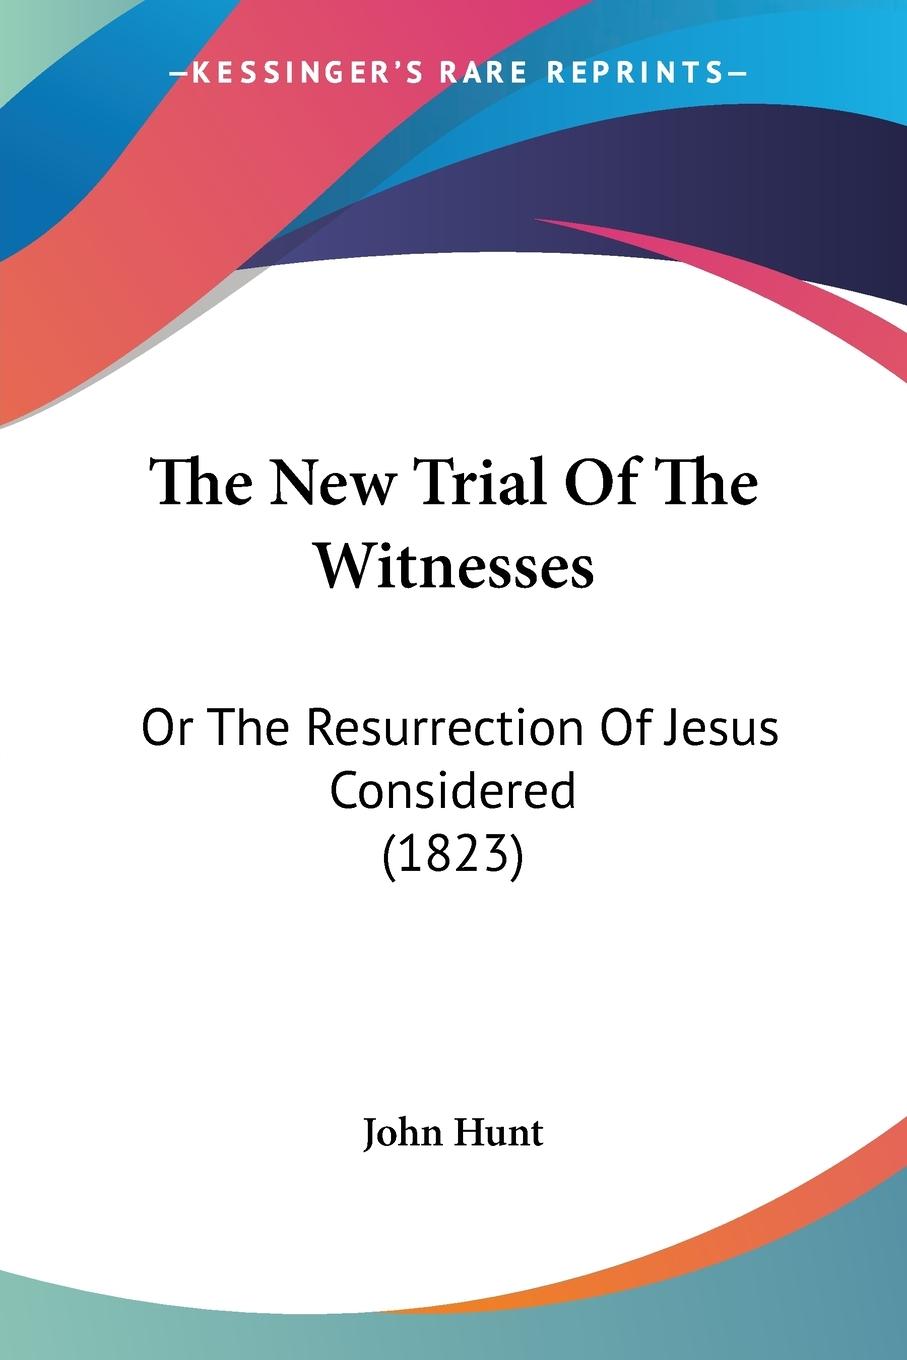 The New Trial Of The Witnesses - John Hunt